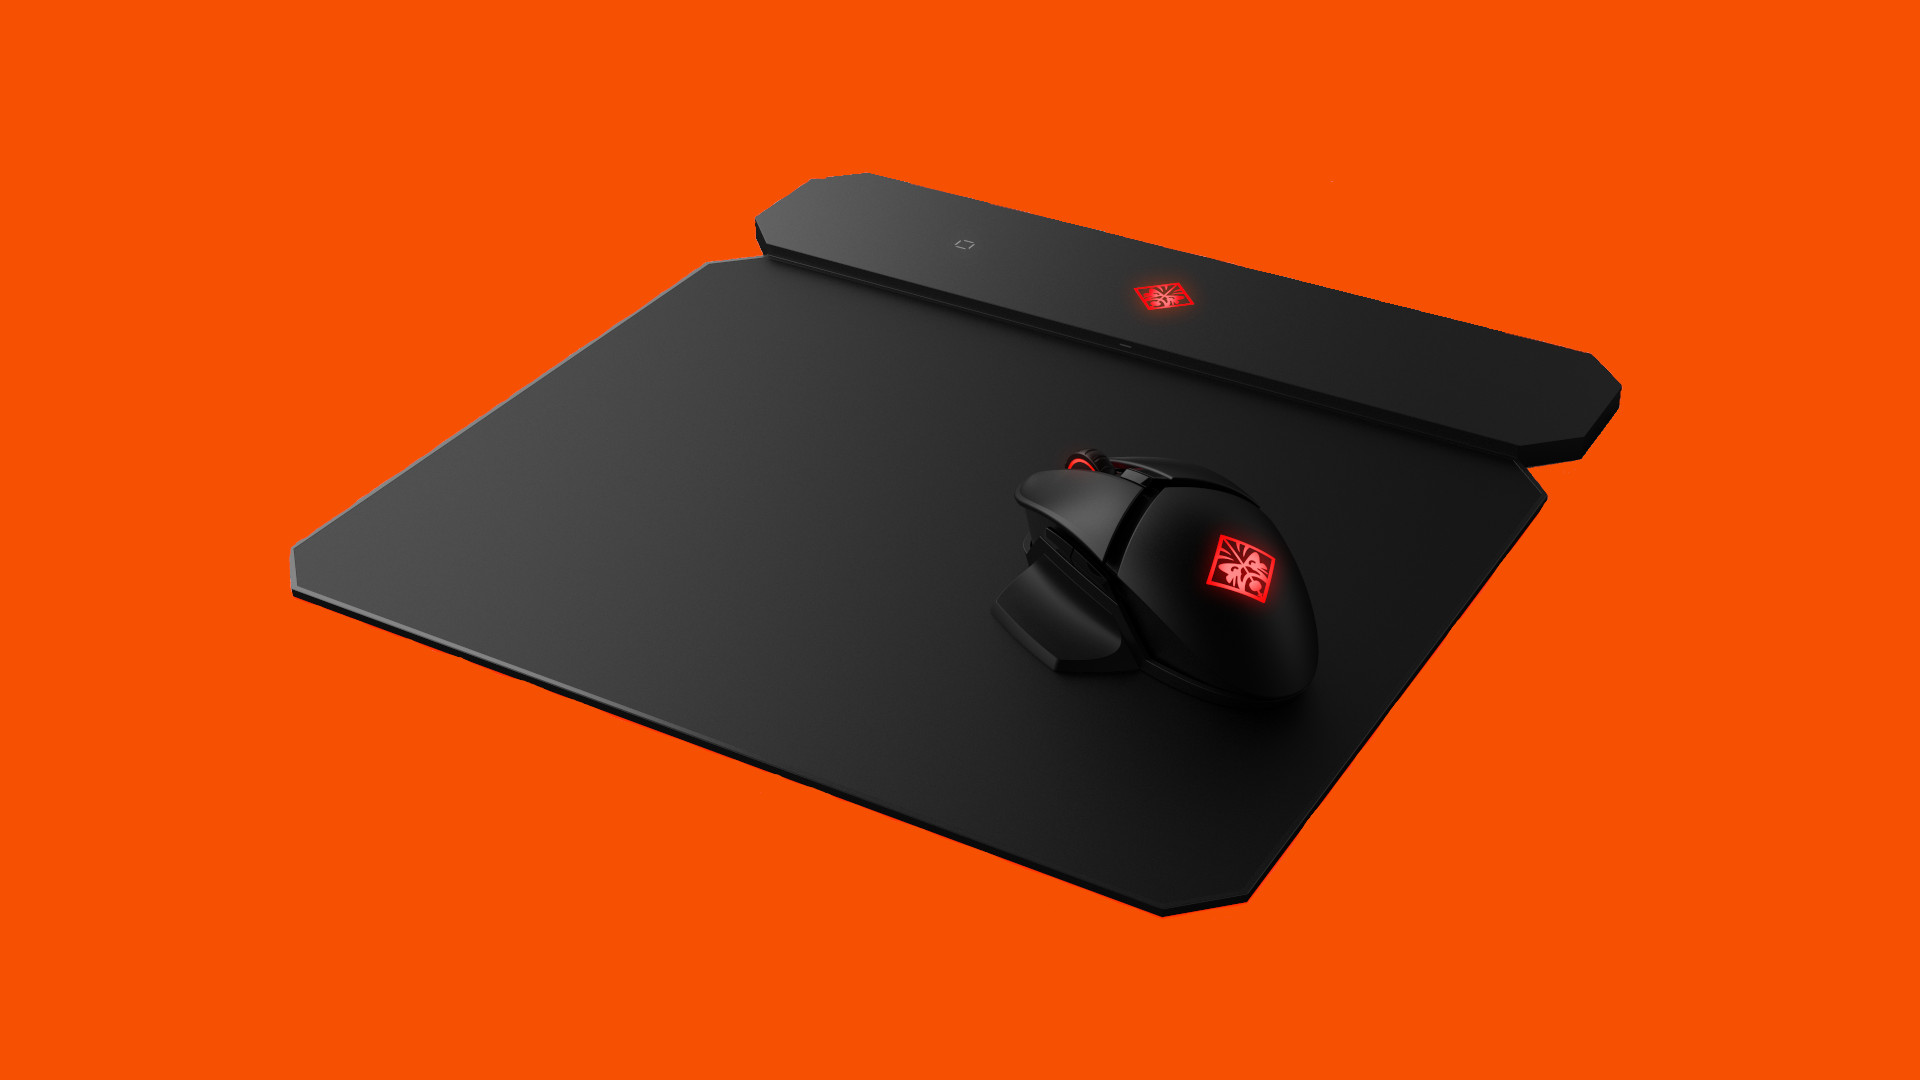 hard or soft mouse pad: An OMEN Photon mousepad with Qi Charging sits on an orange background